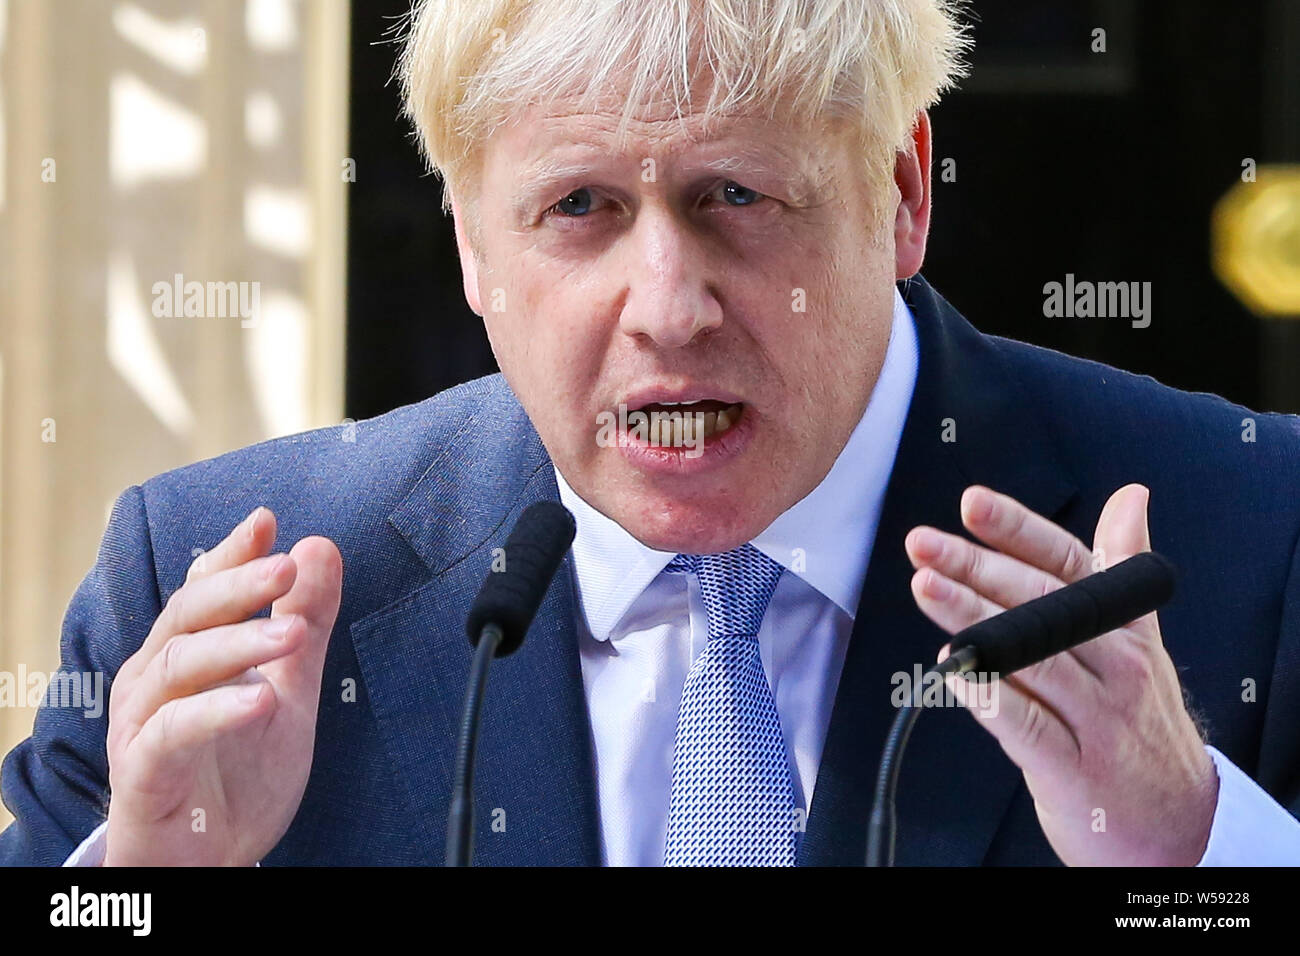 July 24, 2019, London, United Kingdom: Boris Johnson at Downing Street making a statement following his appointment by the Queen as the 77th British Prime Minister. Credit: Steve Taylor/SOPA Images/ZUMA Wire/Alamy Live News Stock Photo